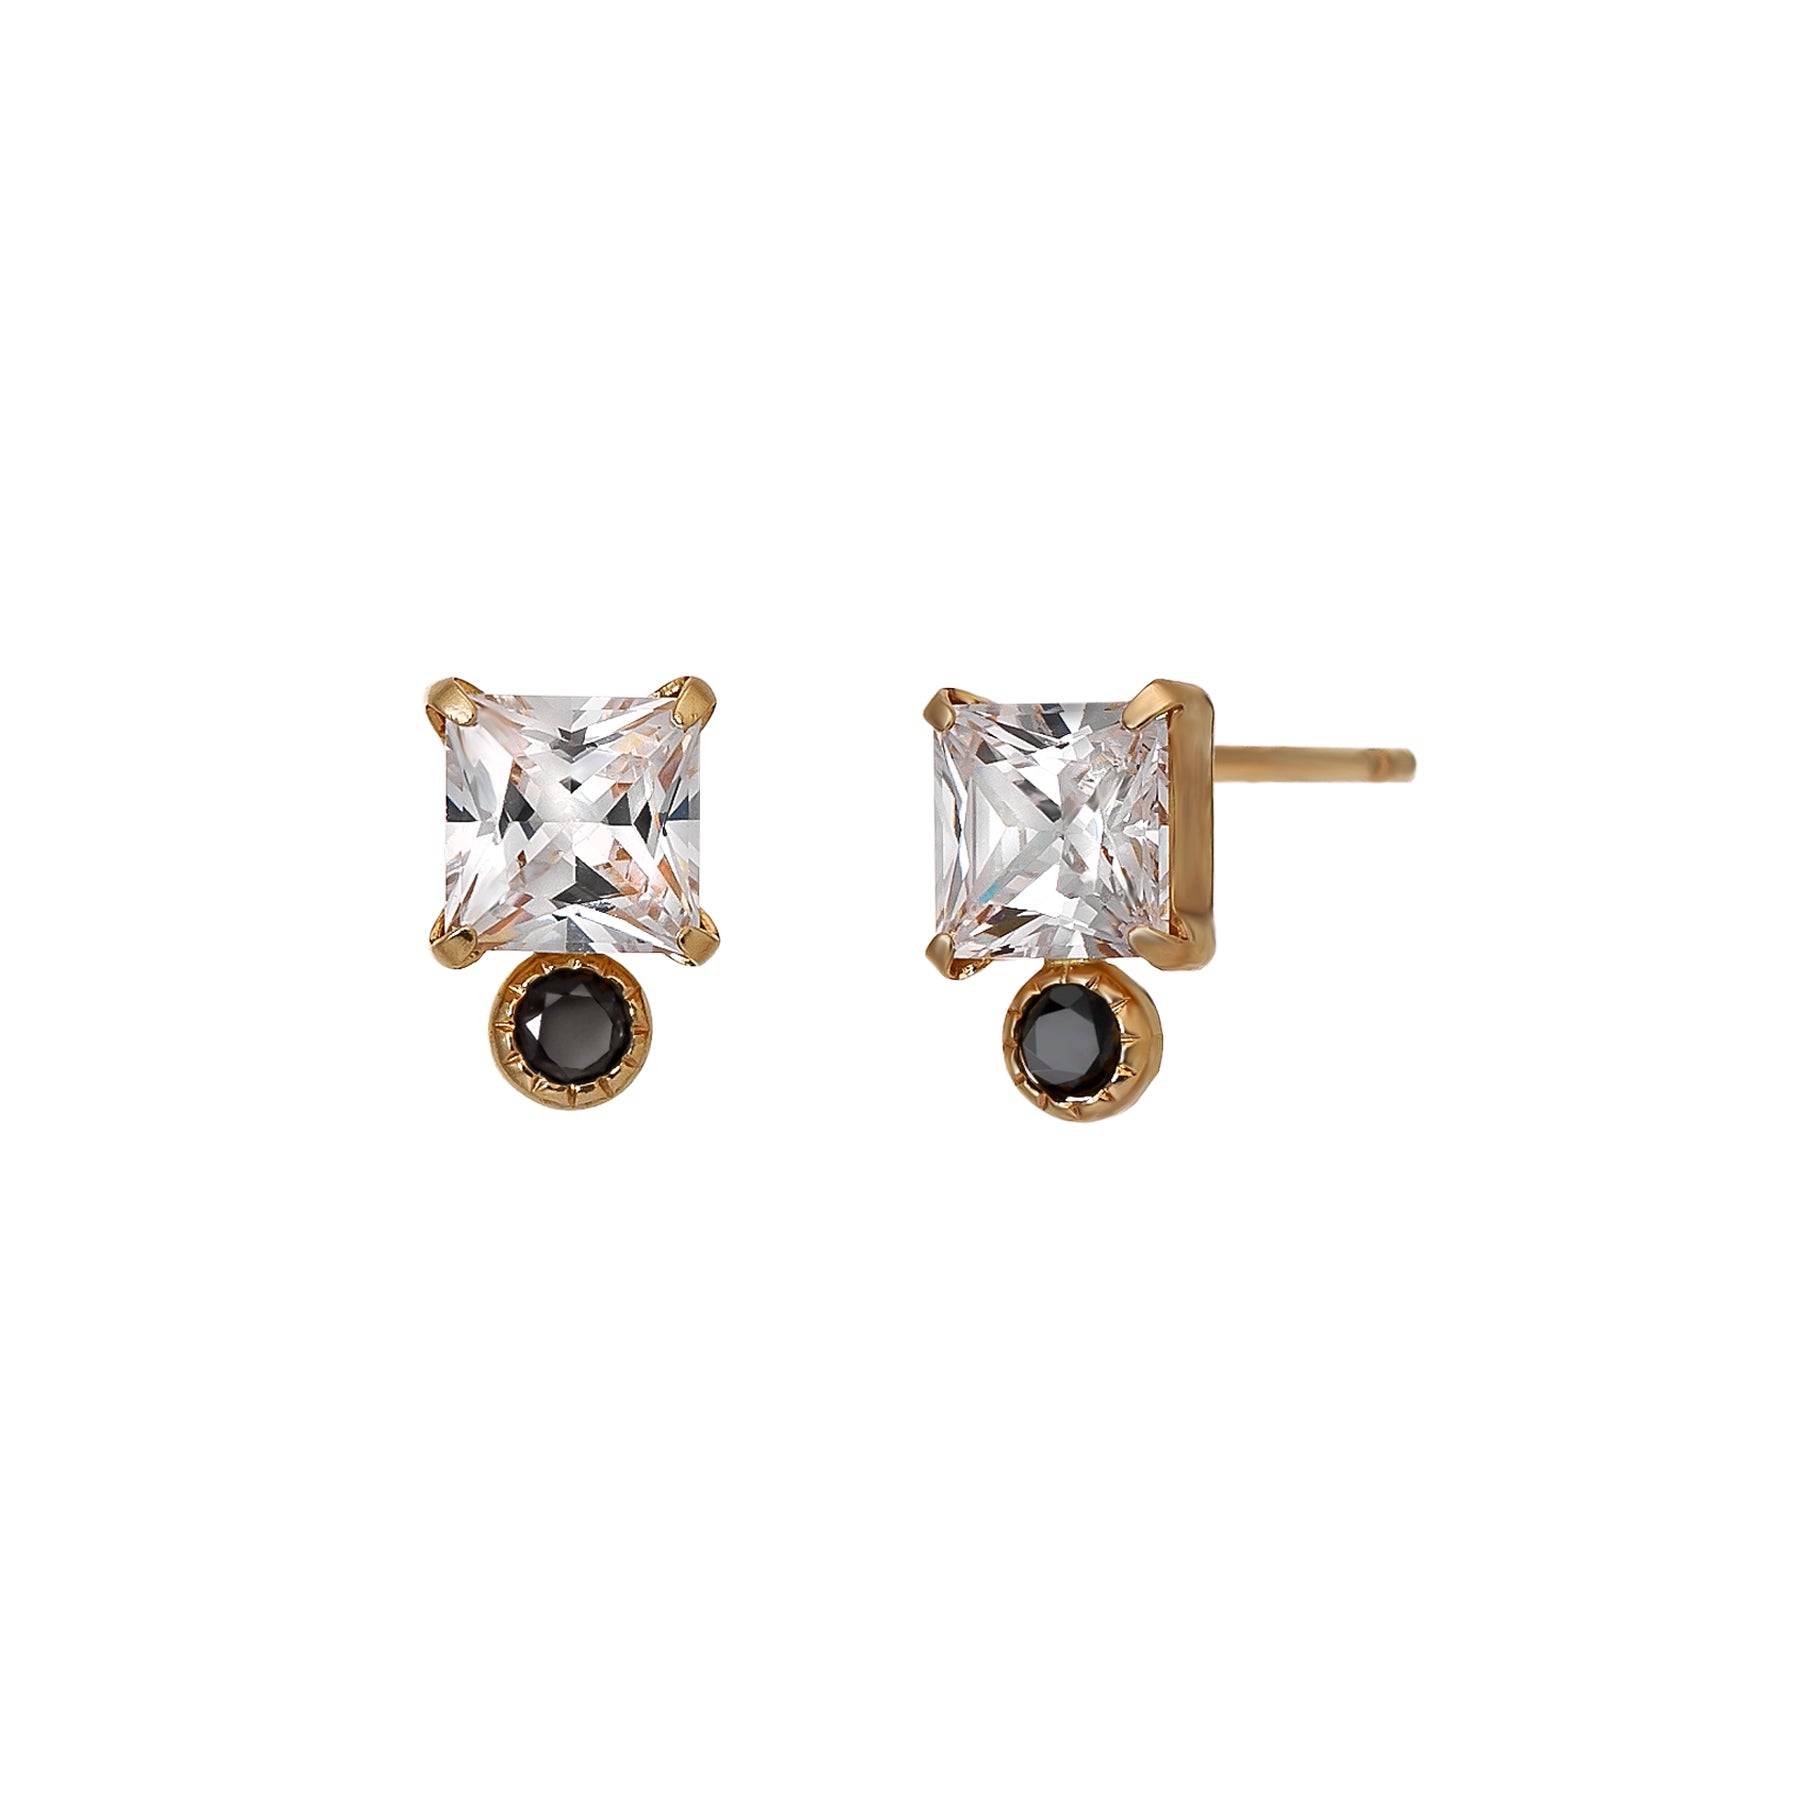 10K Black Color Square Stud Earrings (Yellow Gold) - Product Image